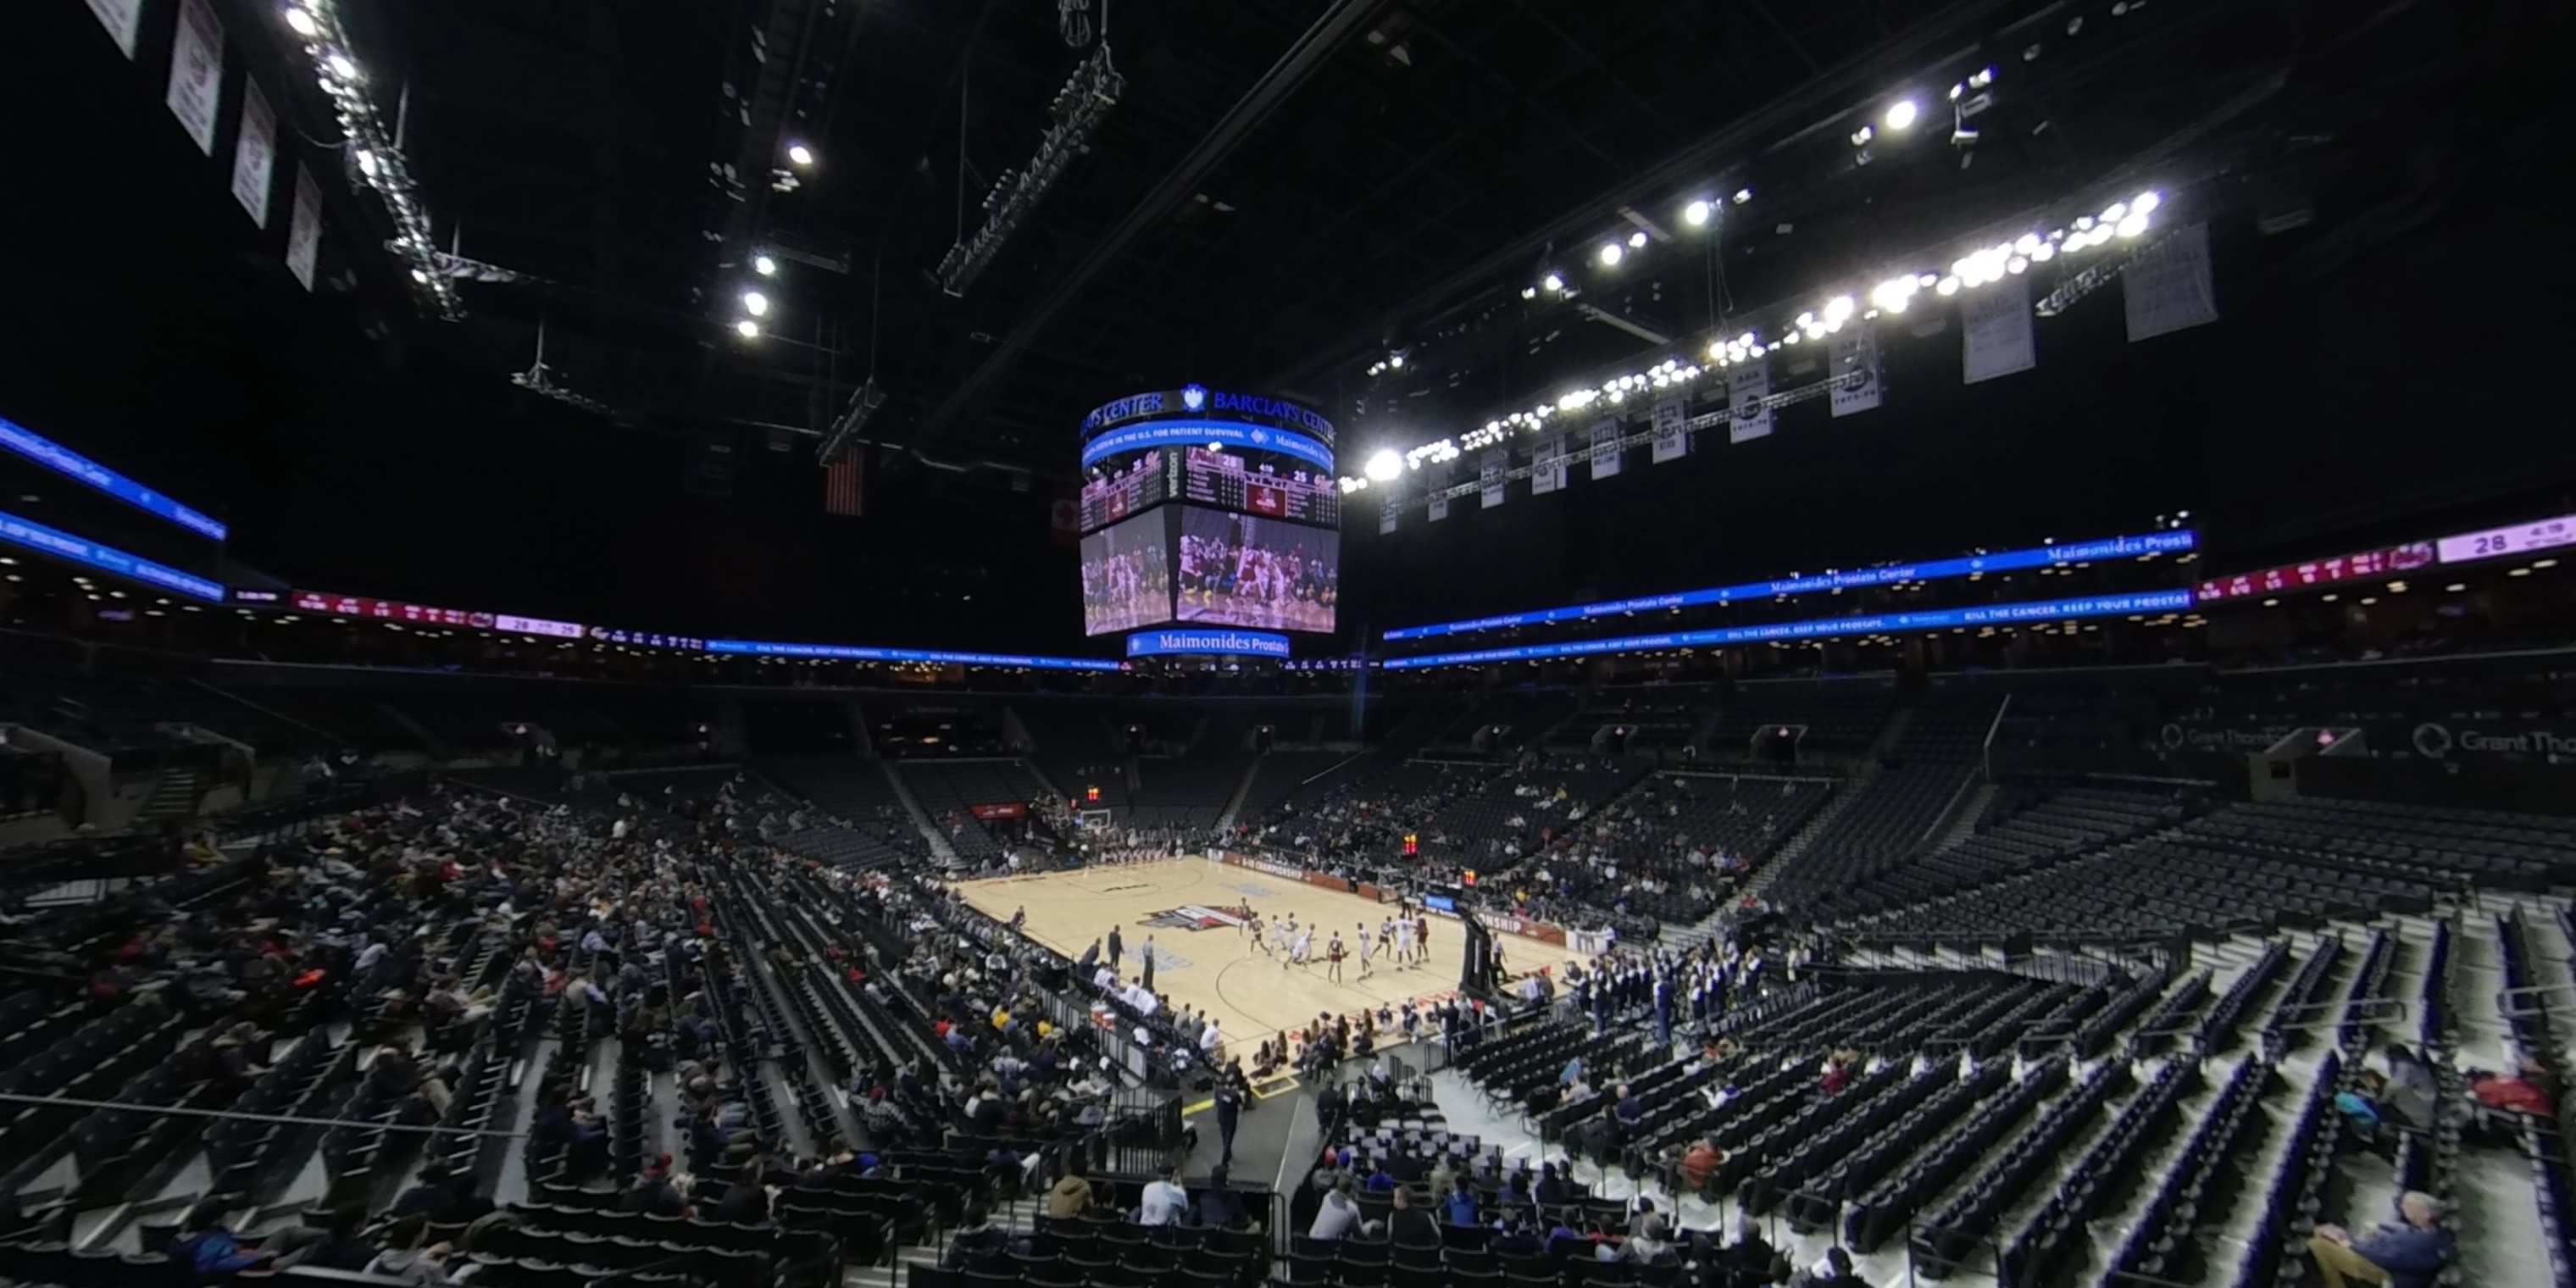 section 102 panoramic seat view  for basketball - barclays center